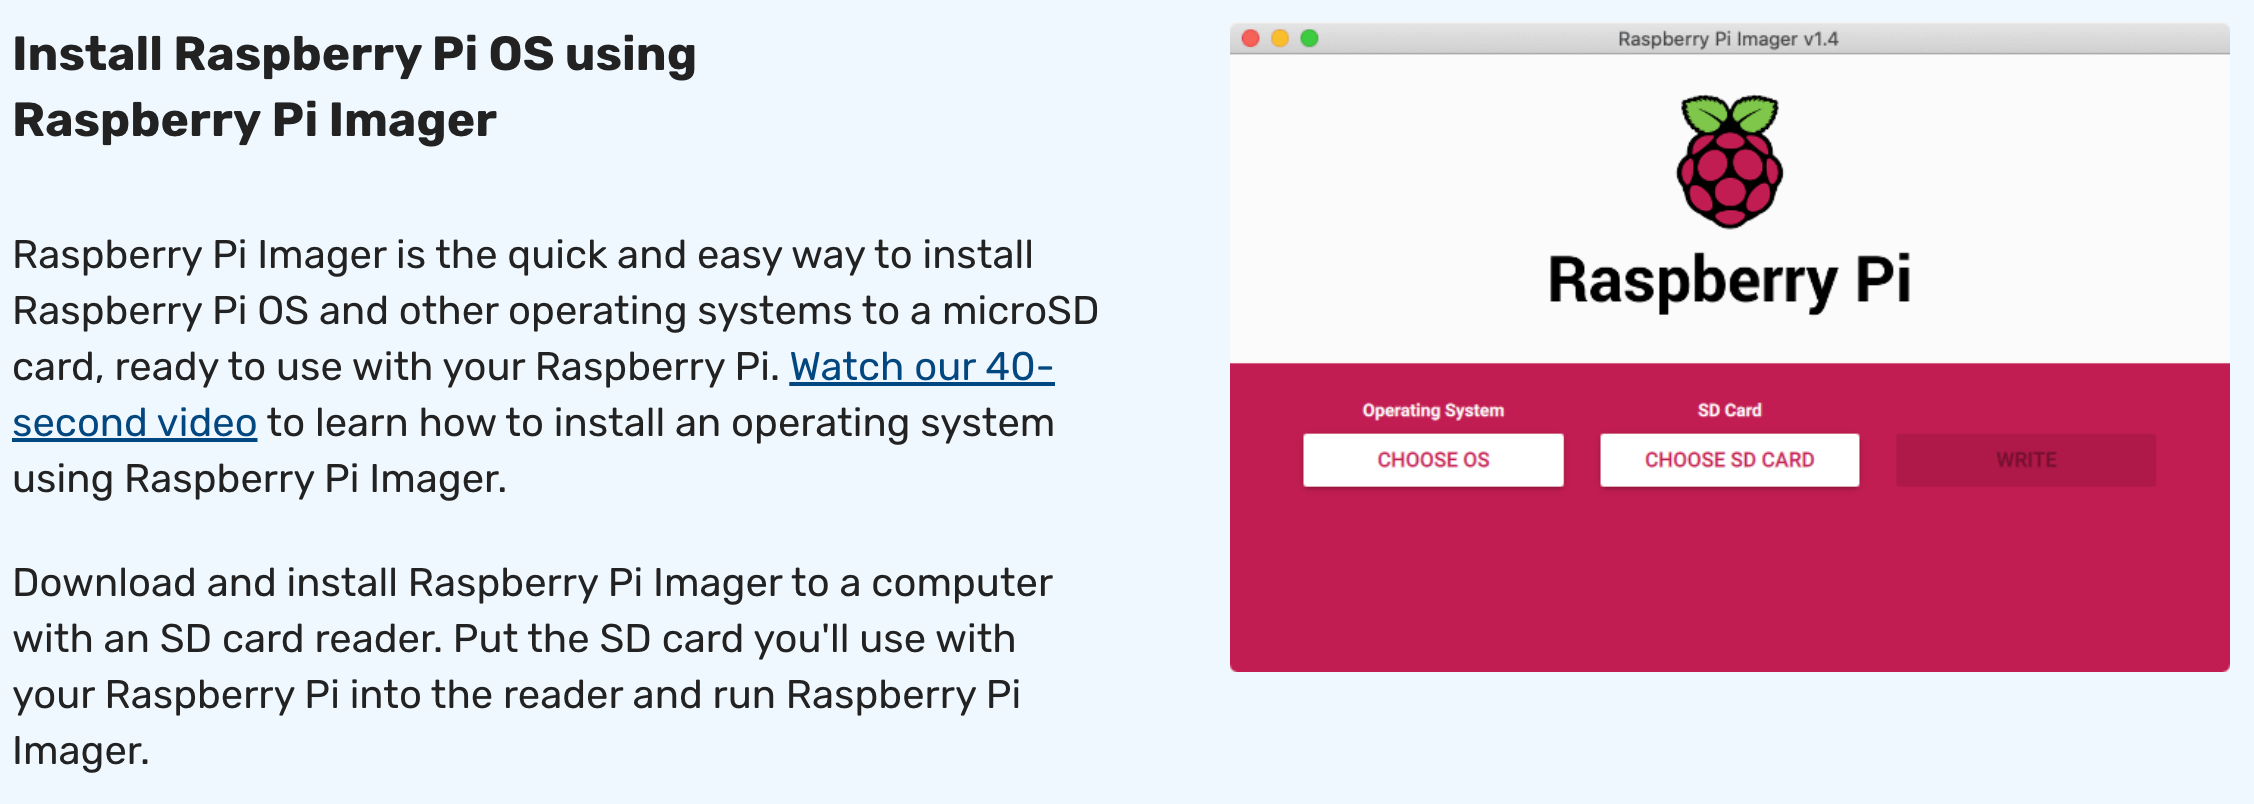 Raspberry Pi Imager Software from the Raspberry Pi Foundation.